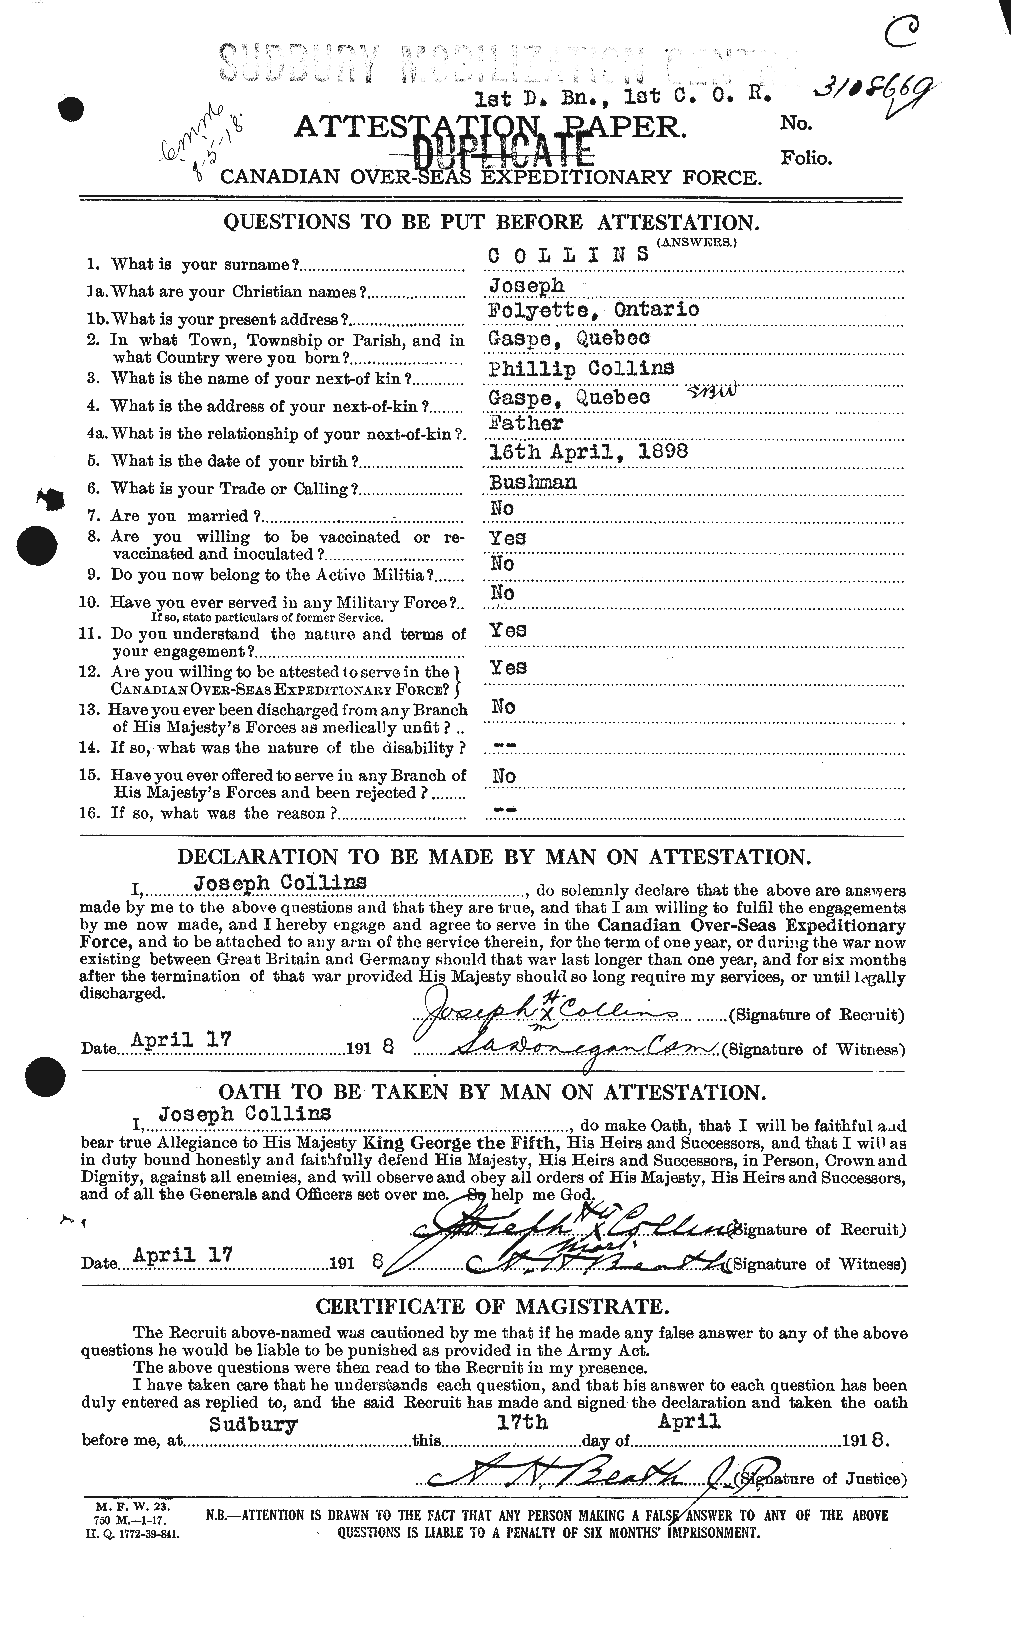 Personnel Records of the First World War - CEF 069517a